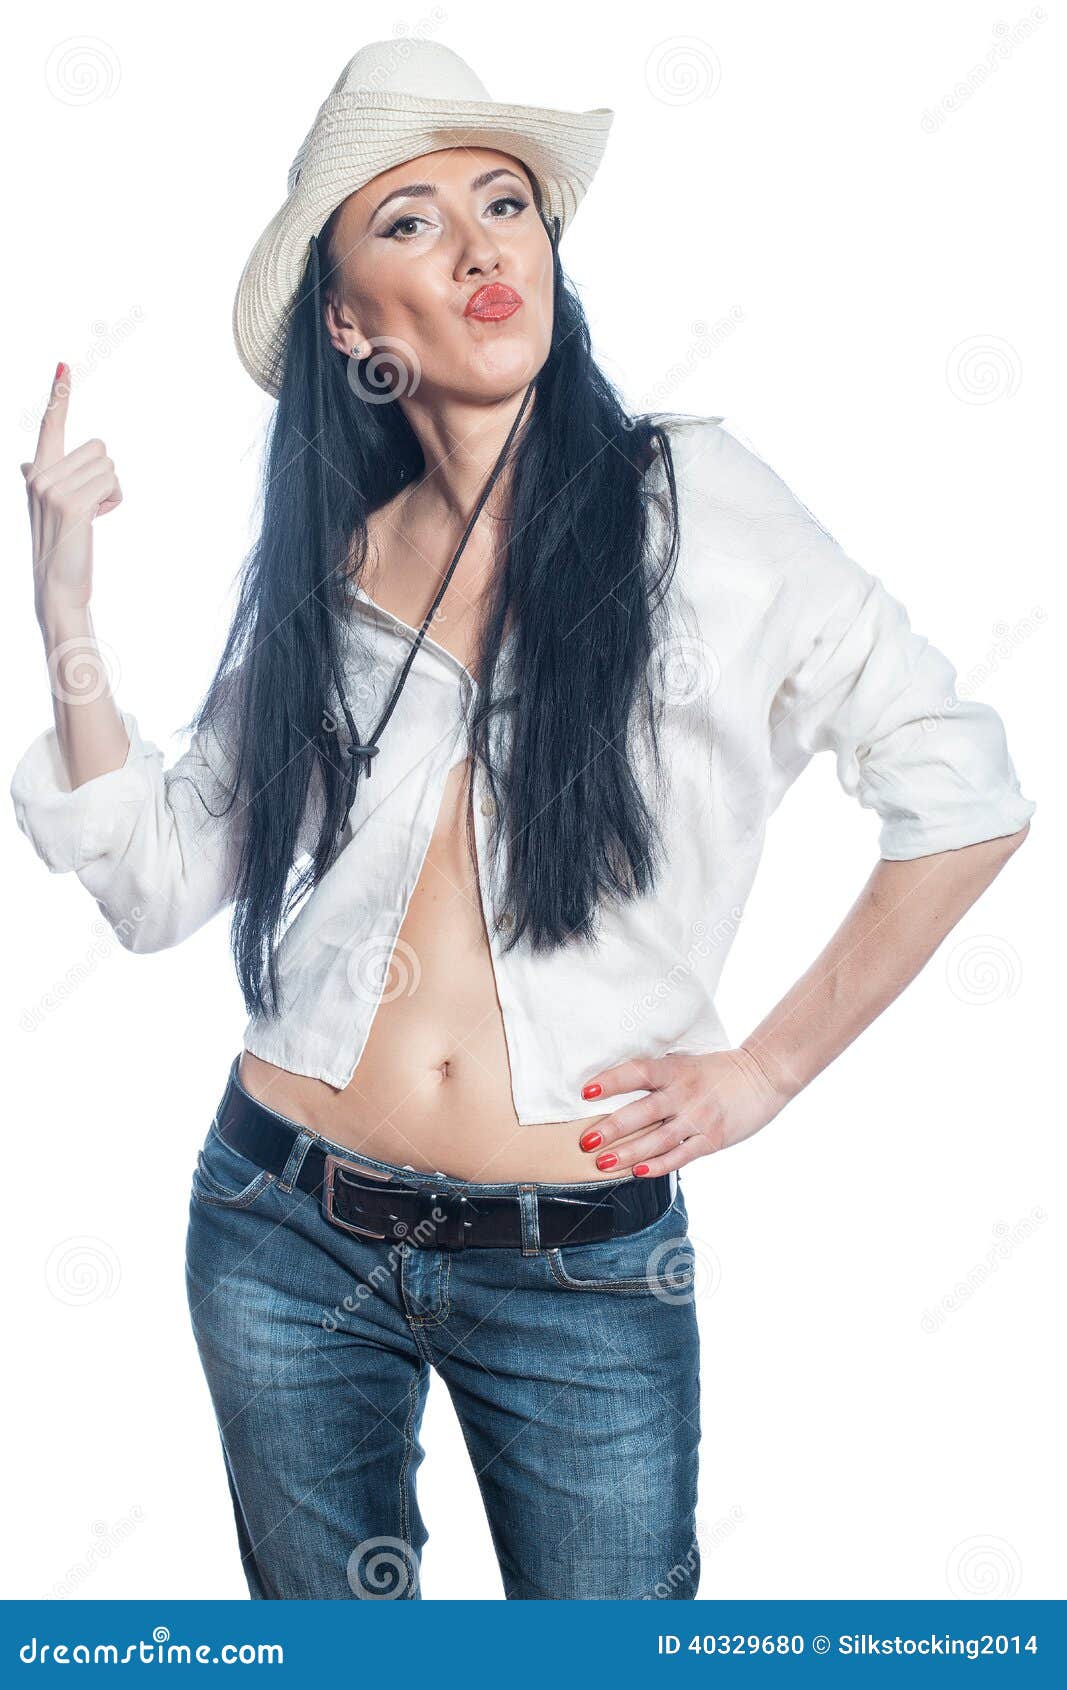 Girl in a hat showing thumb up. Girl in white hat shows his index finger upwards.